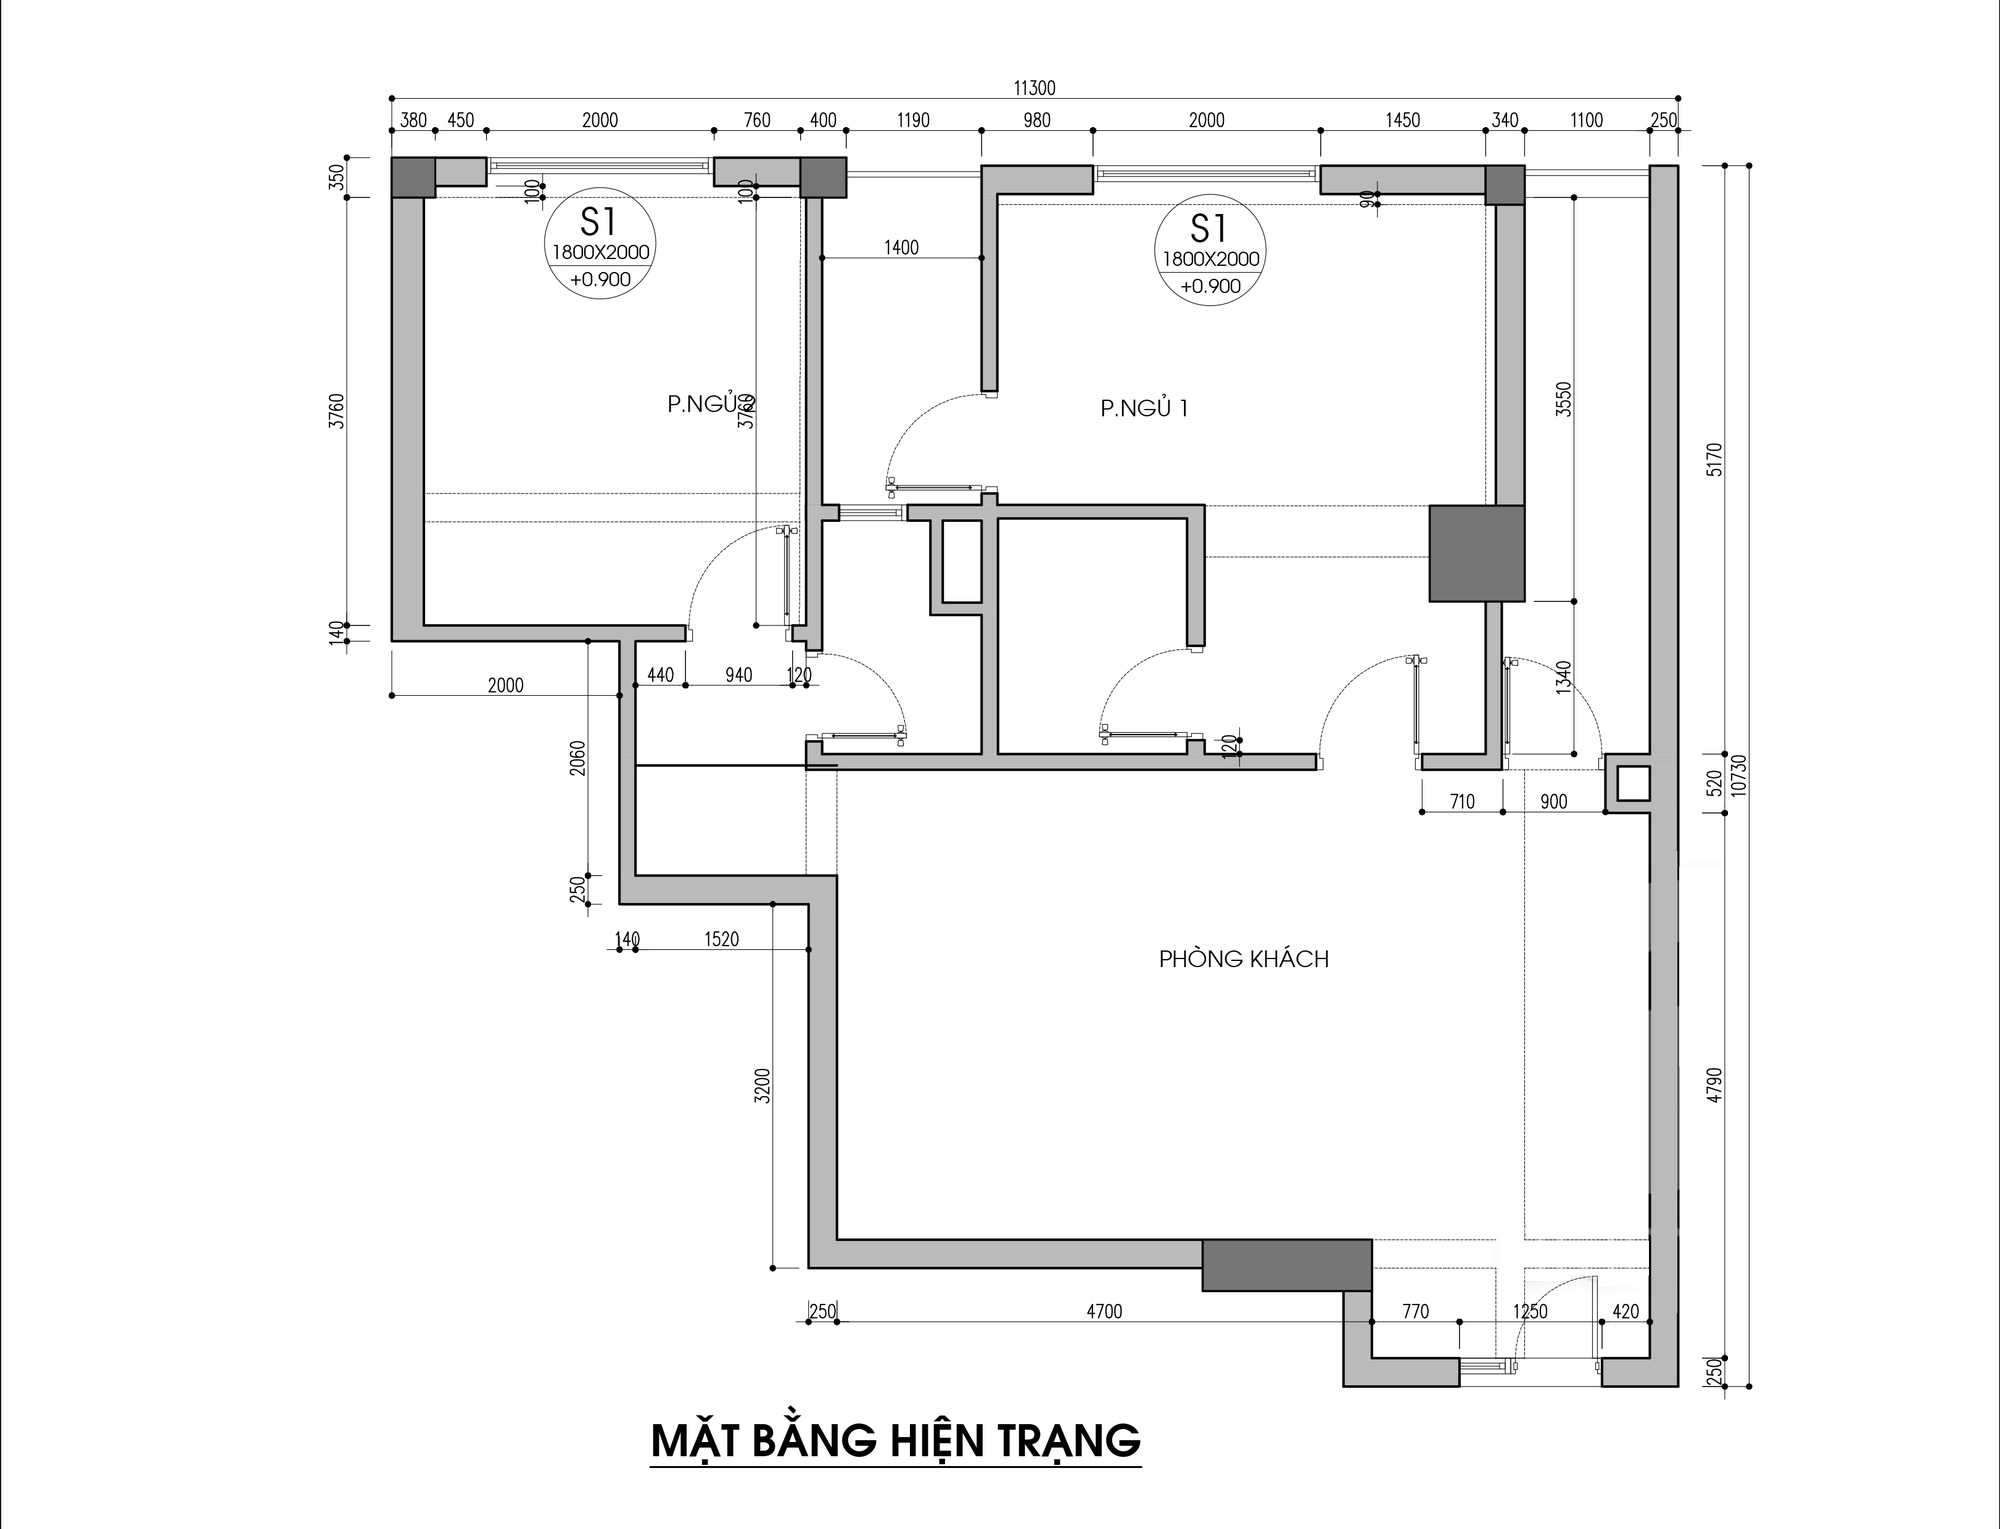 Consultant to renovate a 79m² apartment with a total cost of VND 140 million - Photo 1.